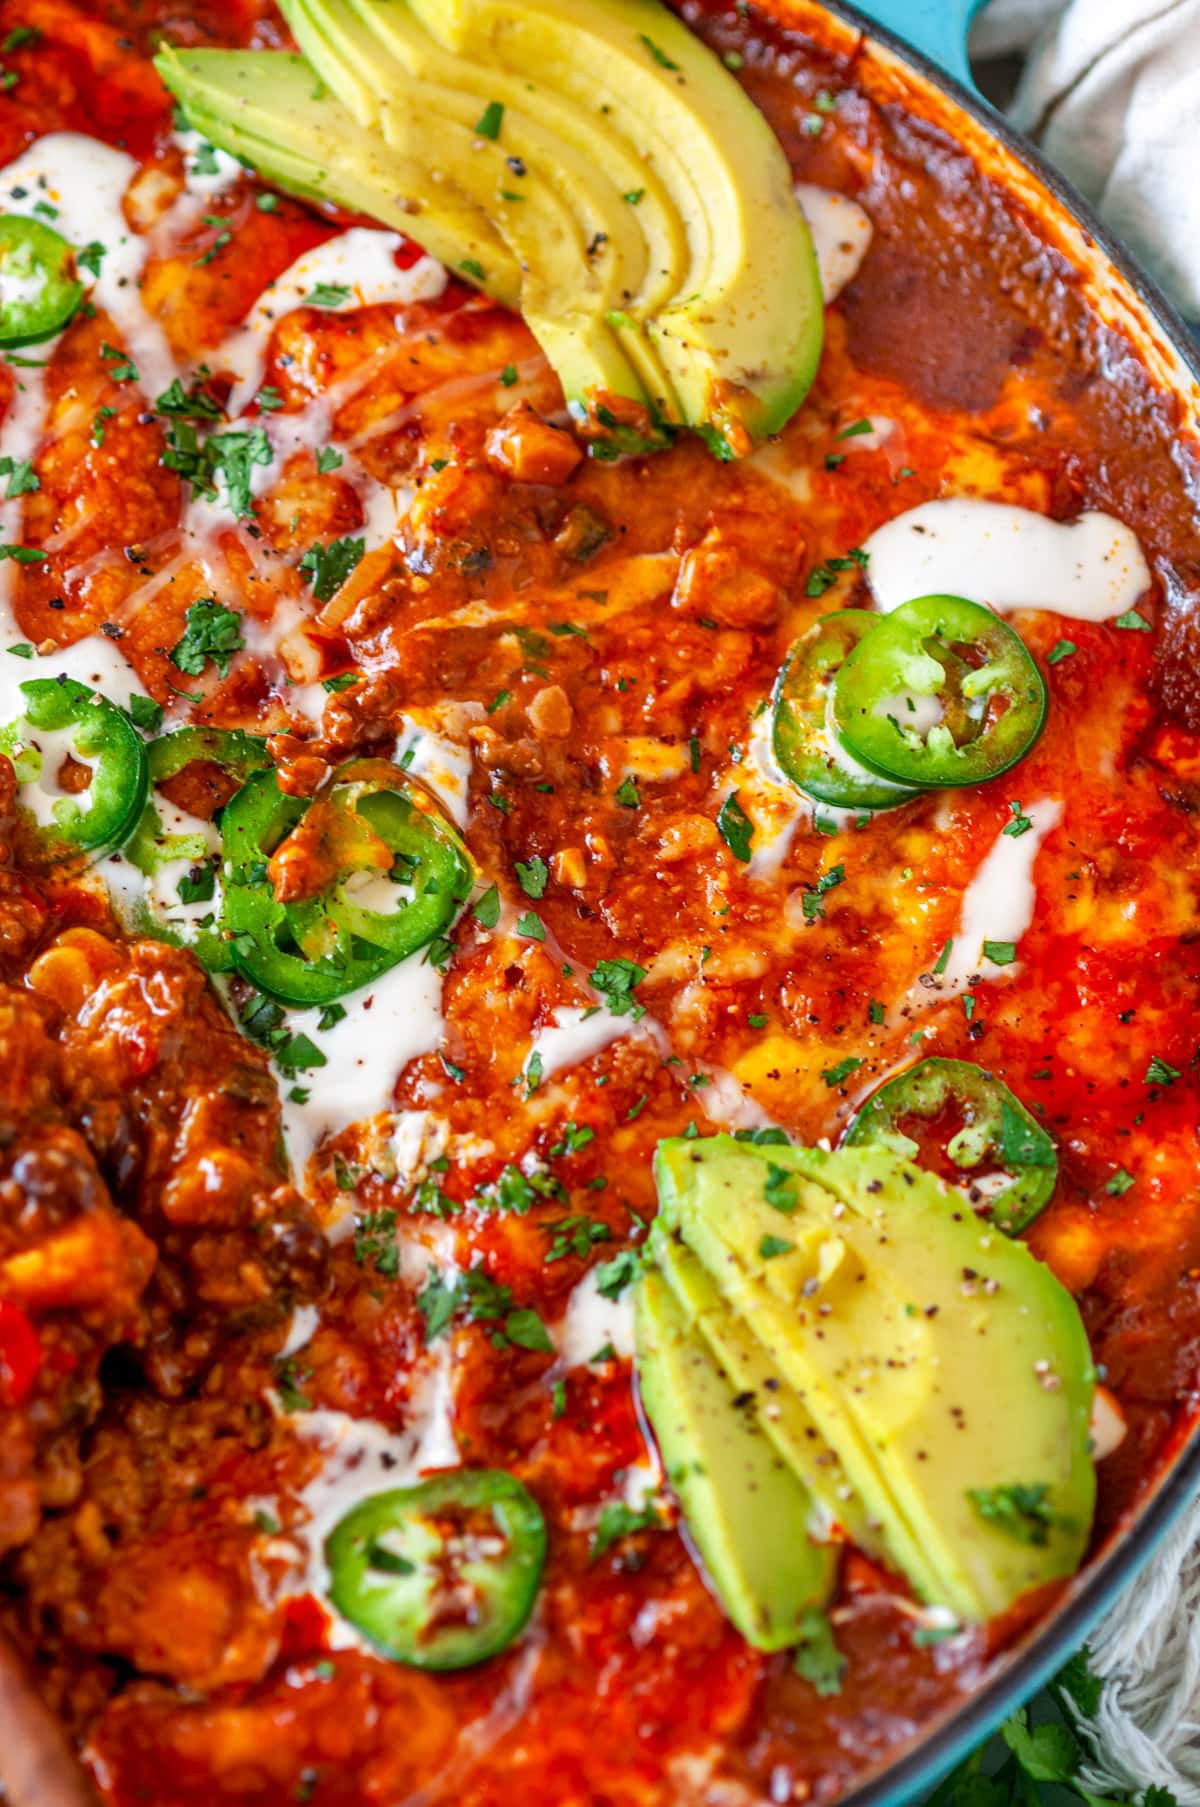 One Pot Red Enchilada Bake with sliced avocado, jalapeno, cilantro, and crema Mexicana drizzled on top